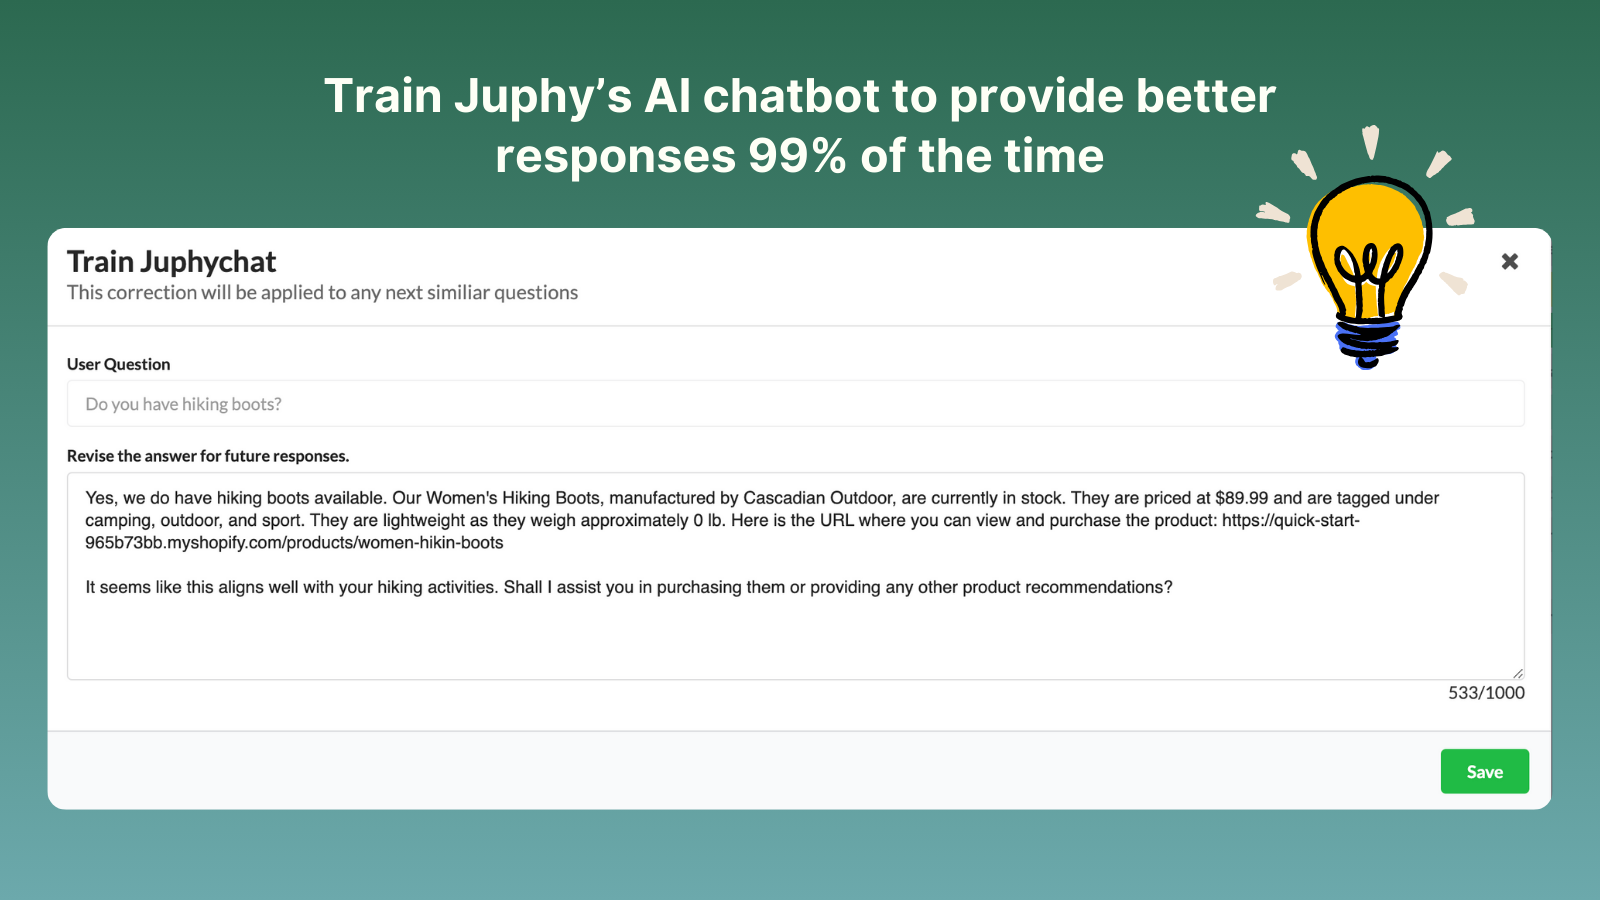 Train Juphy's AI Shopping Assistant to give better responses